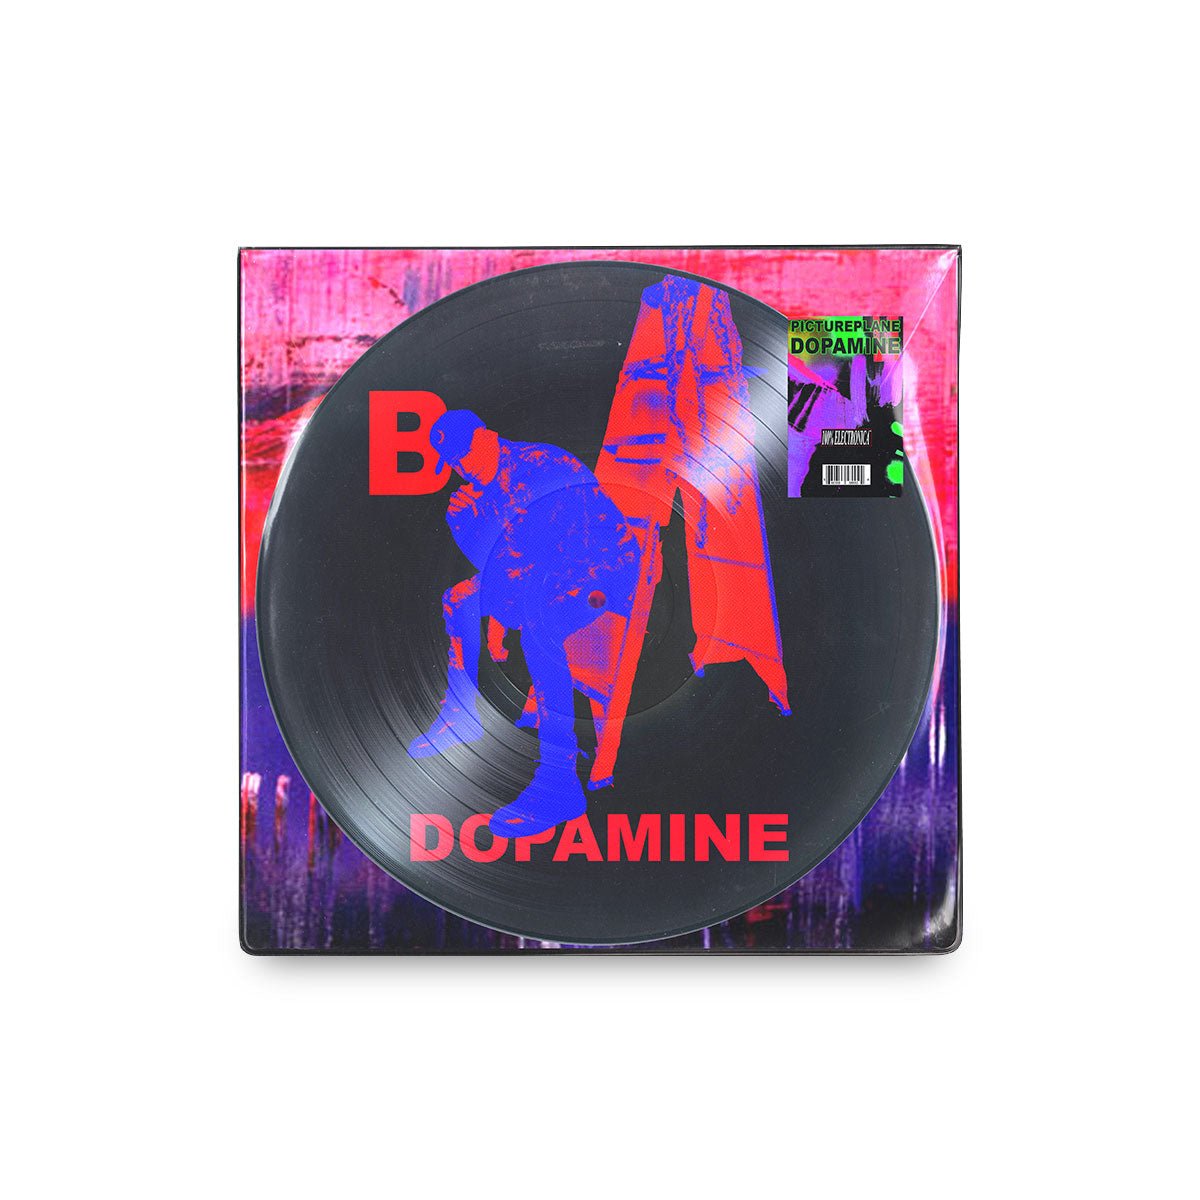 PICTUREPLANE - Dopamine LTD Edition Picture Disc + Poster - 100% Electronica Official Store (Photo 2)